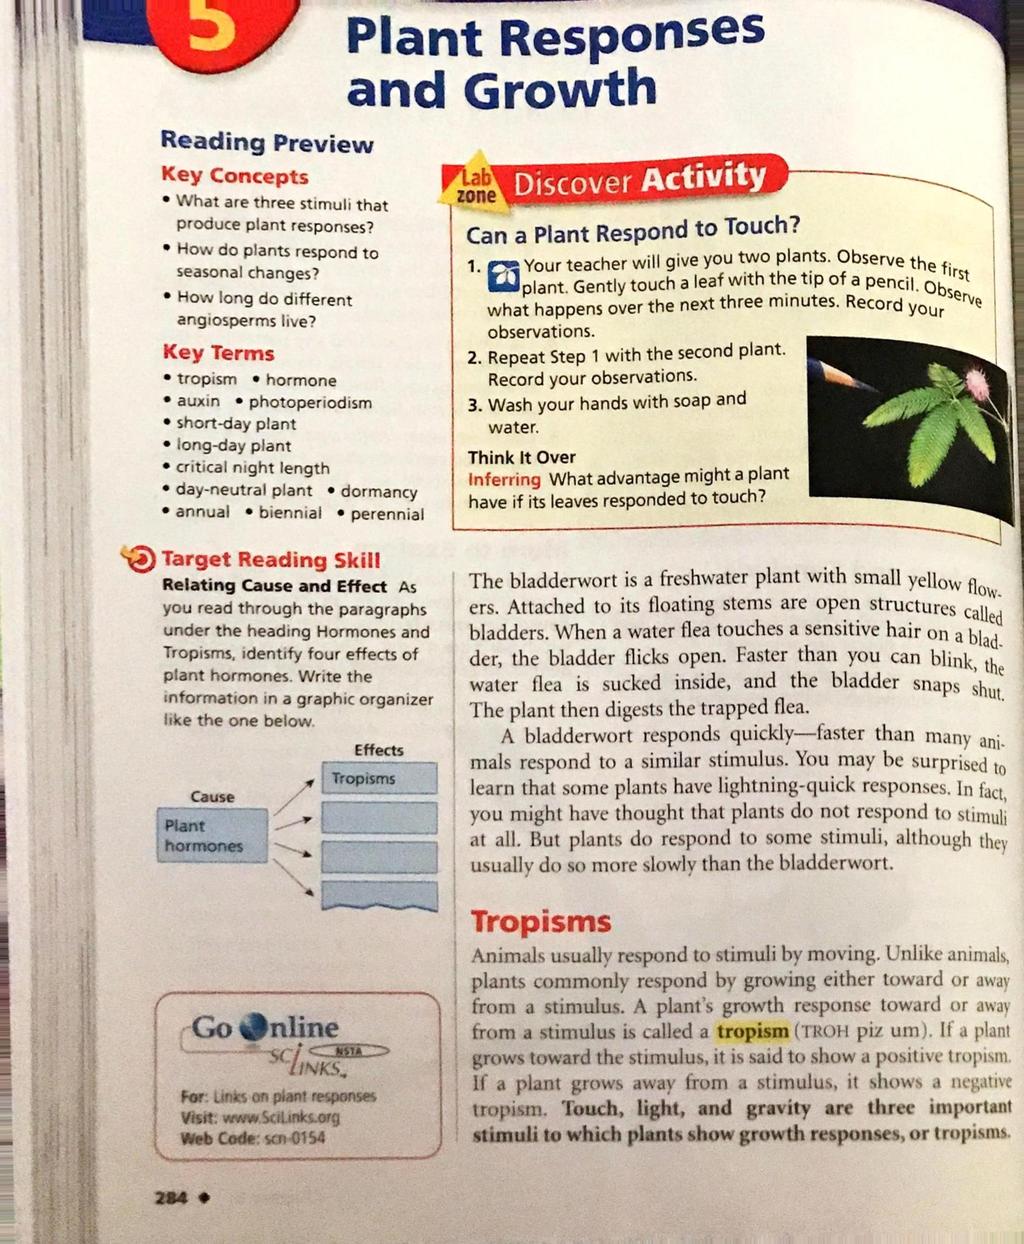 i Reading Preview What are three stimuli that produce plant responses? How do plants respond to seasonal changes? How long do different angiosperms live?